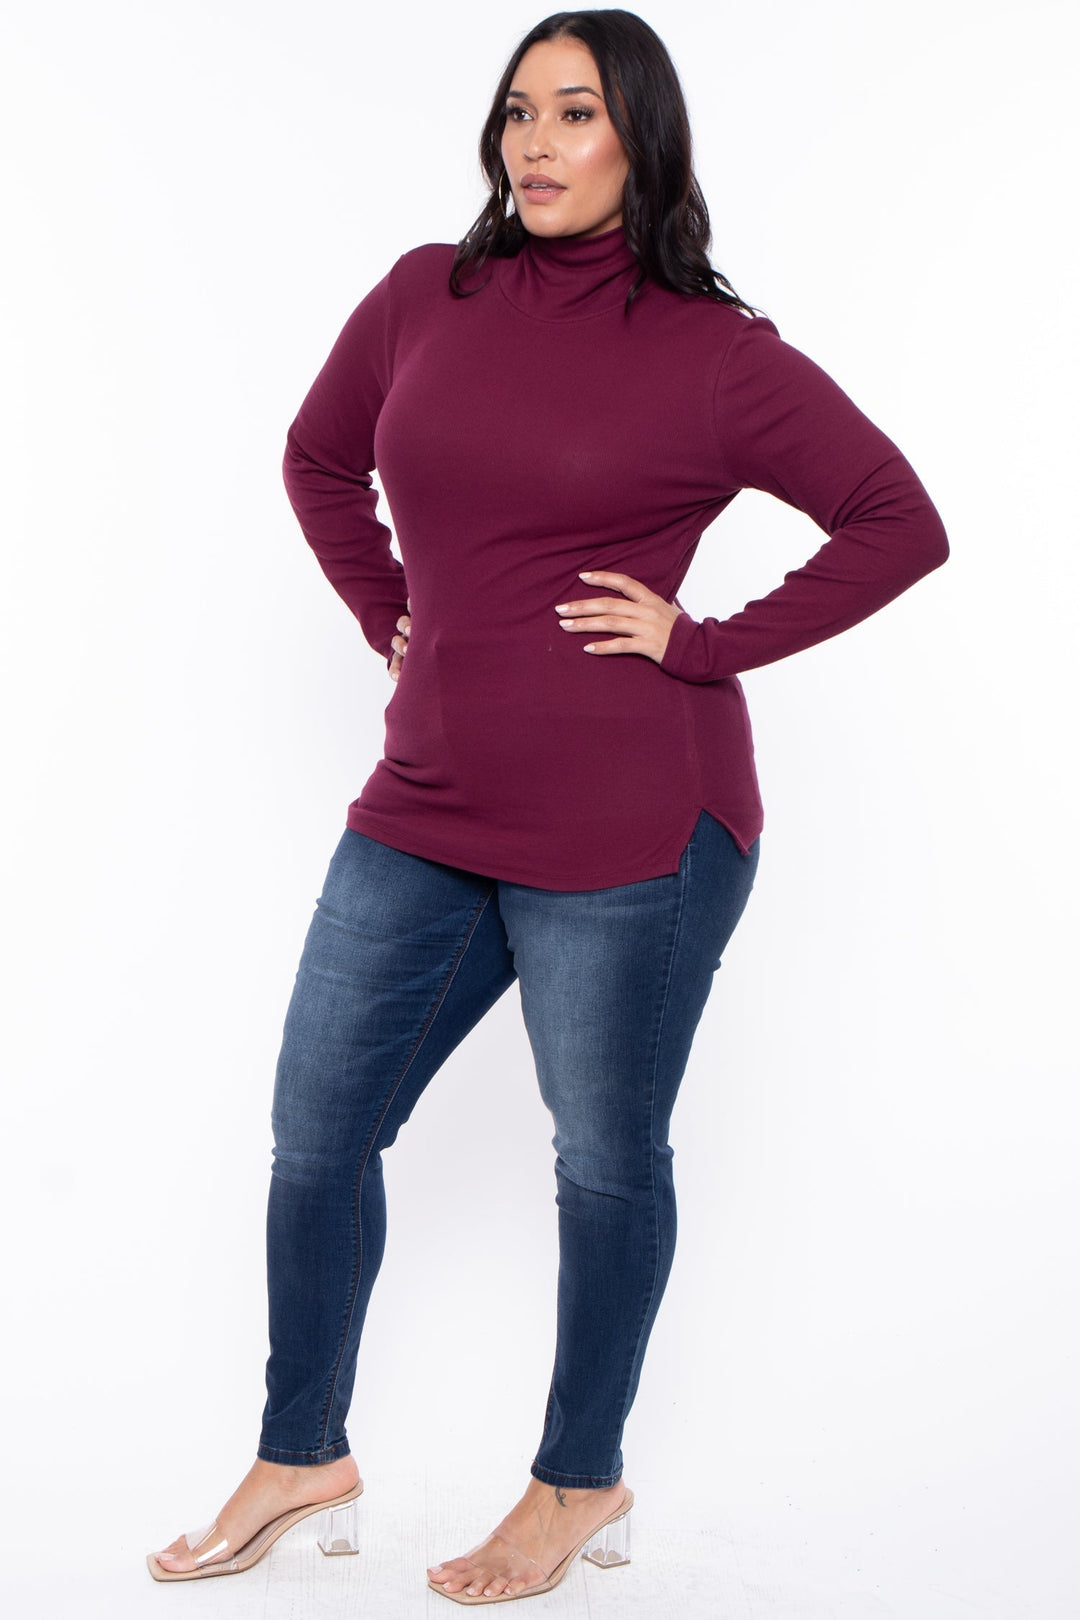 Ambiance Tops Plus Size Ribbed Turtleneck Top - Burgundy